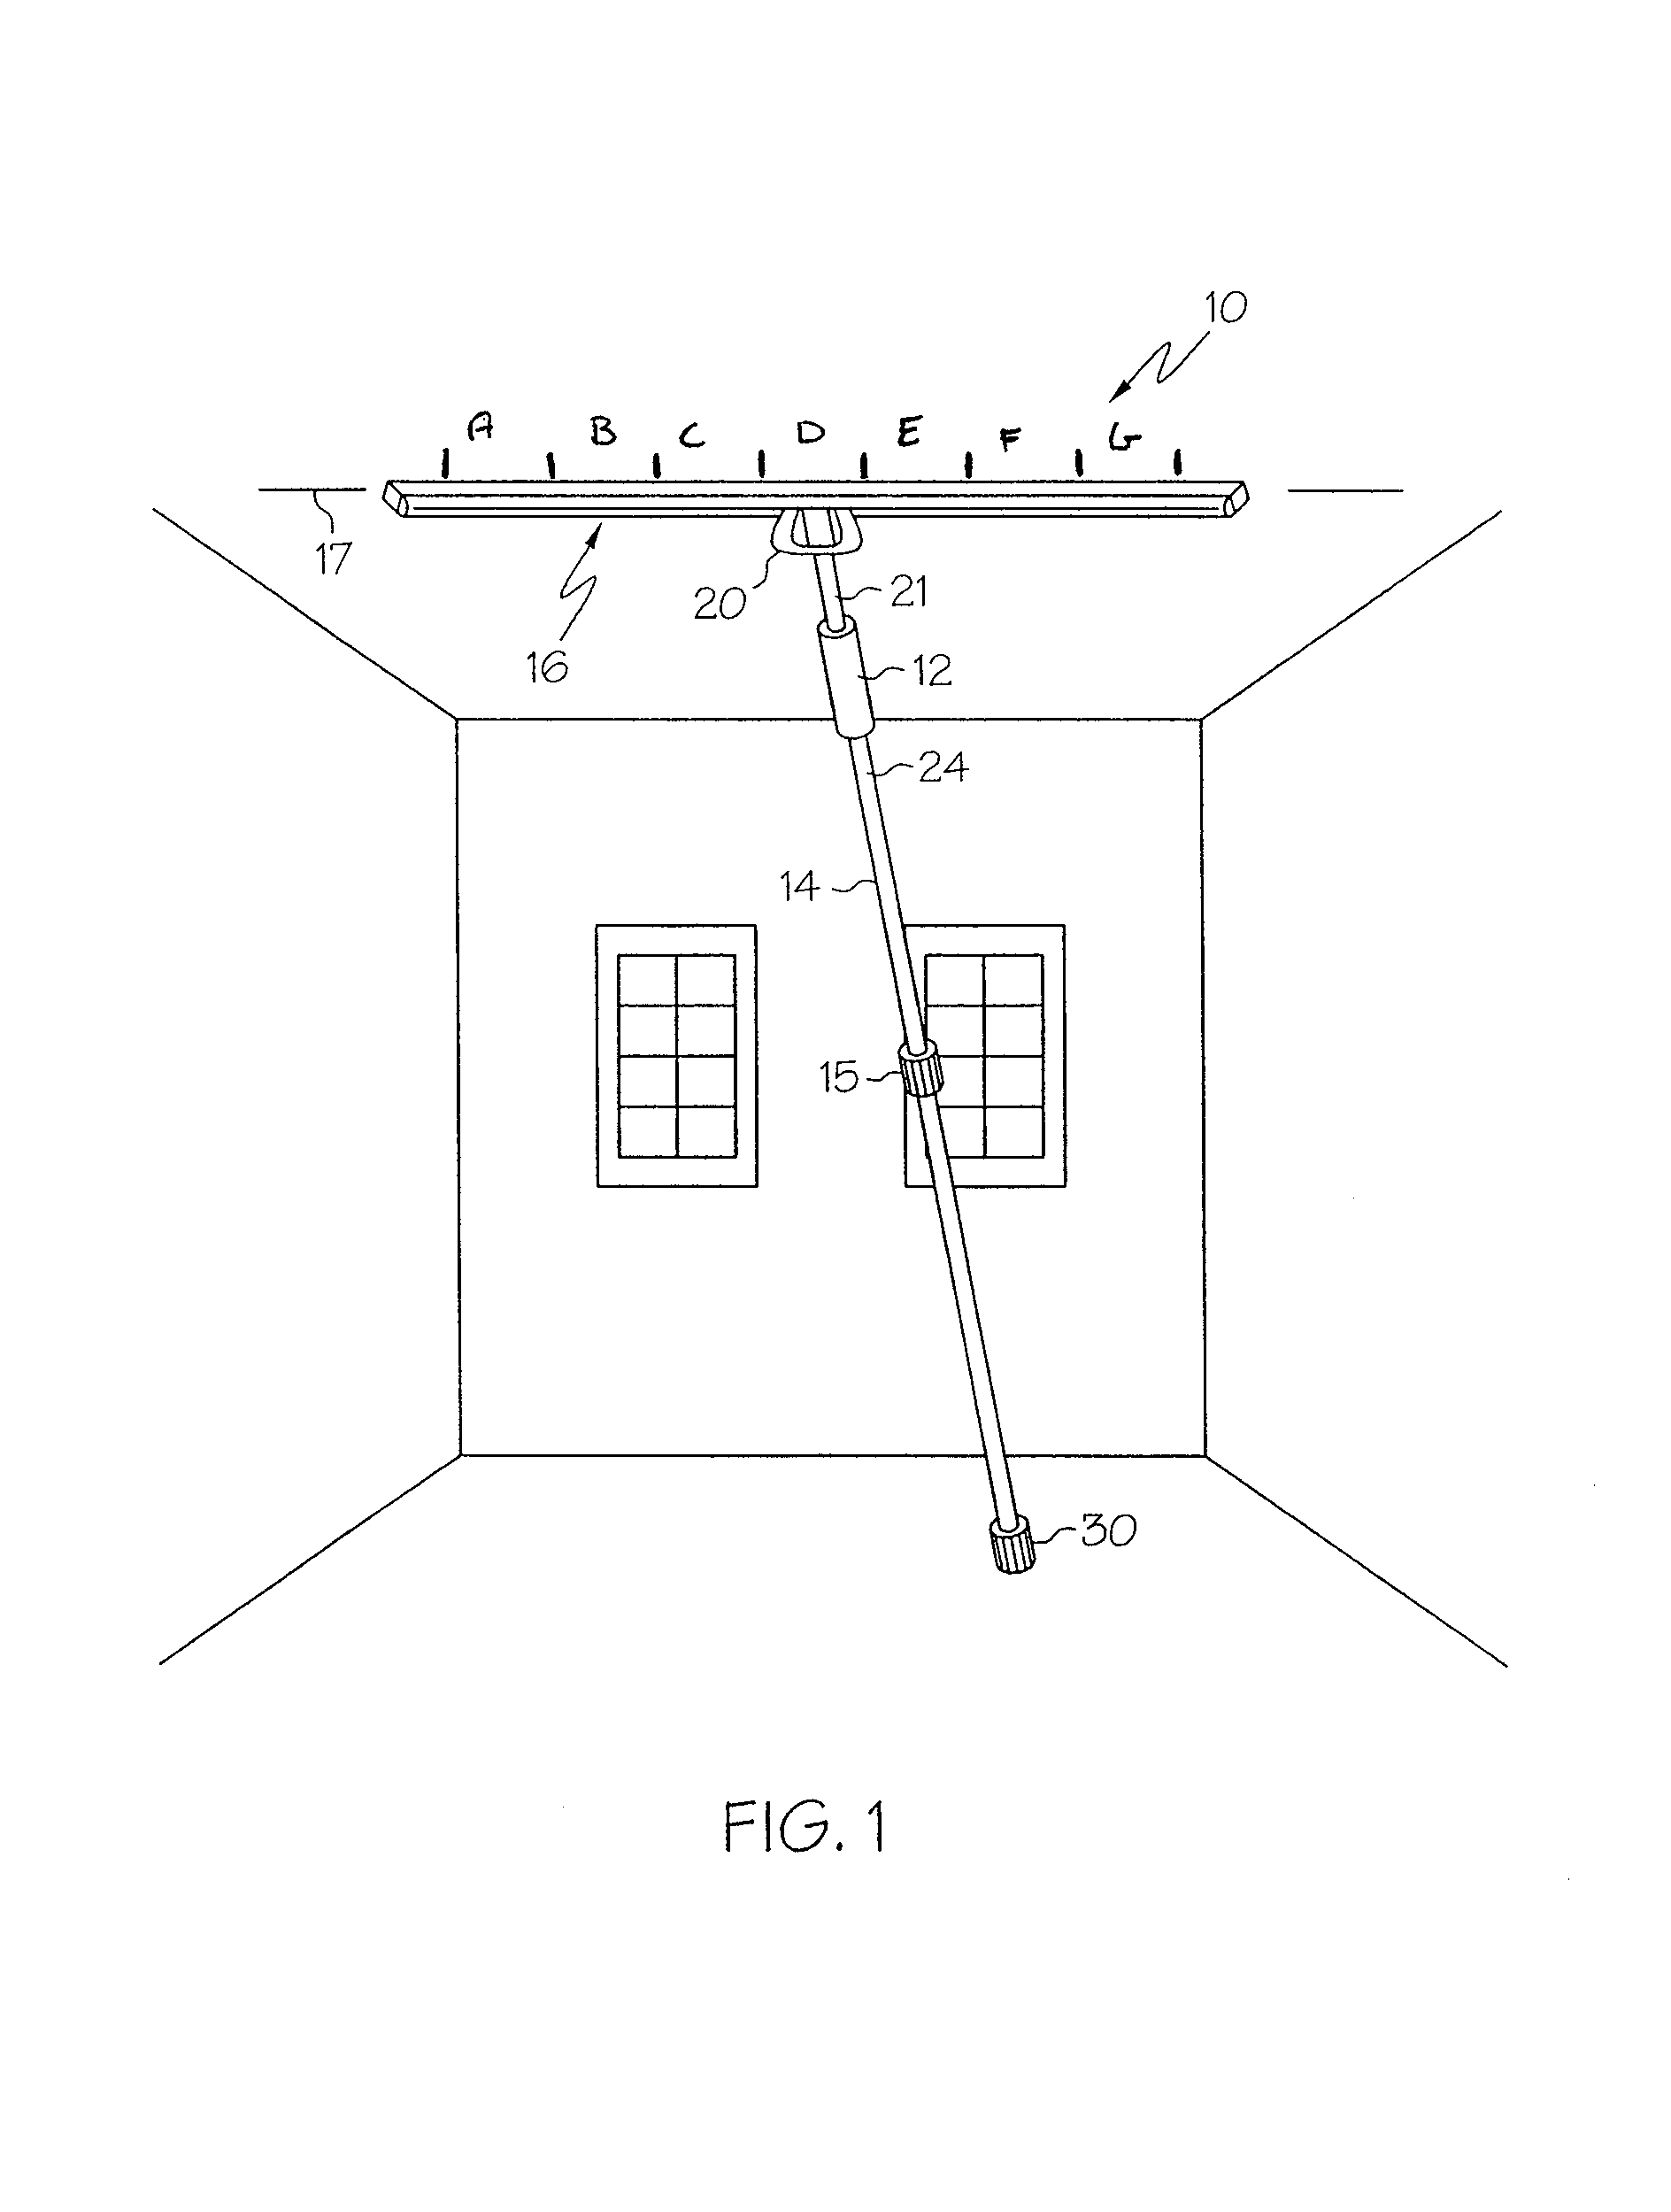 Partition mount with extended-length head